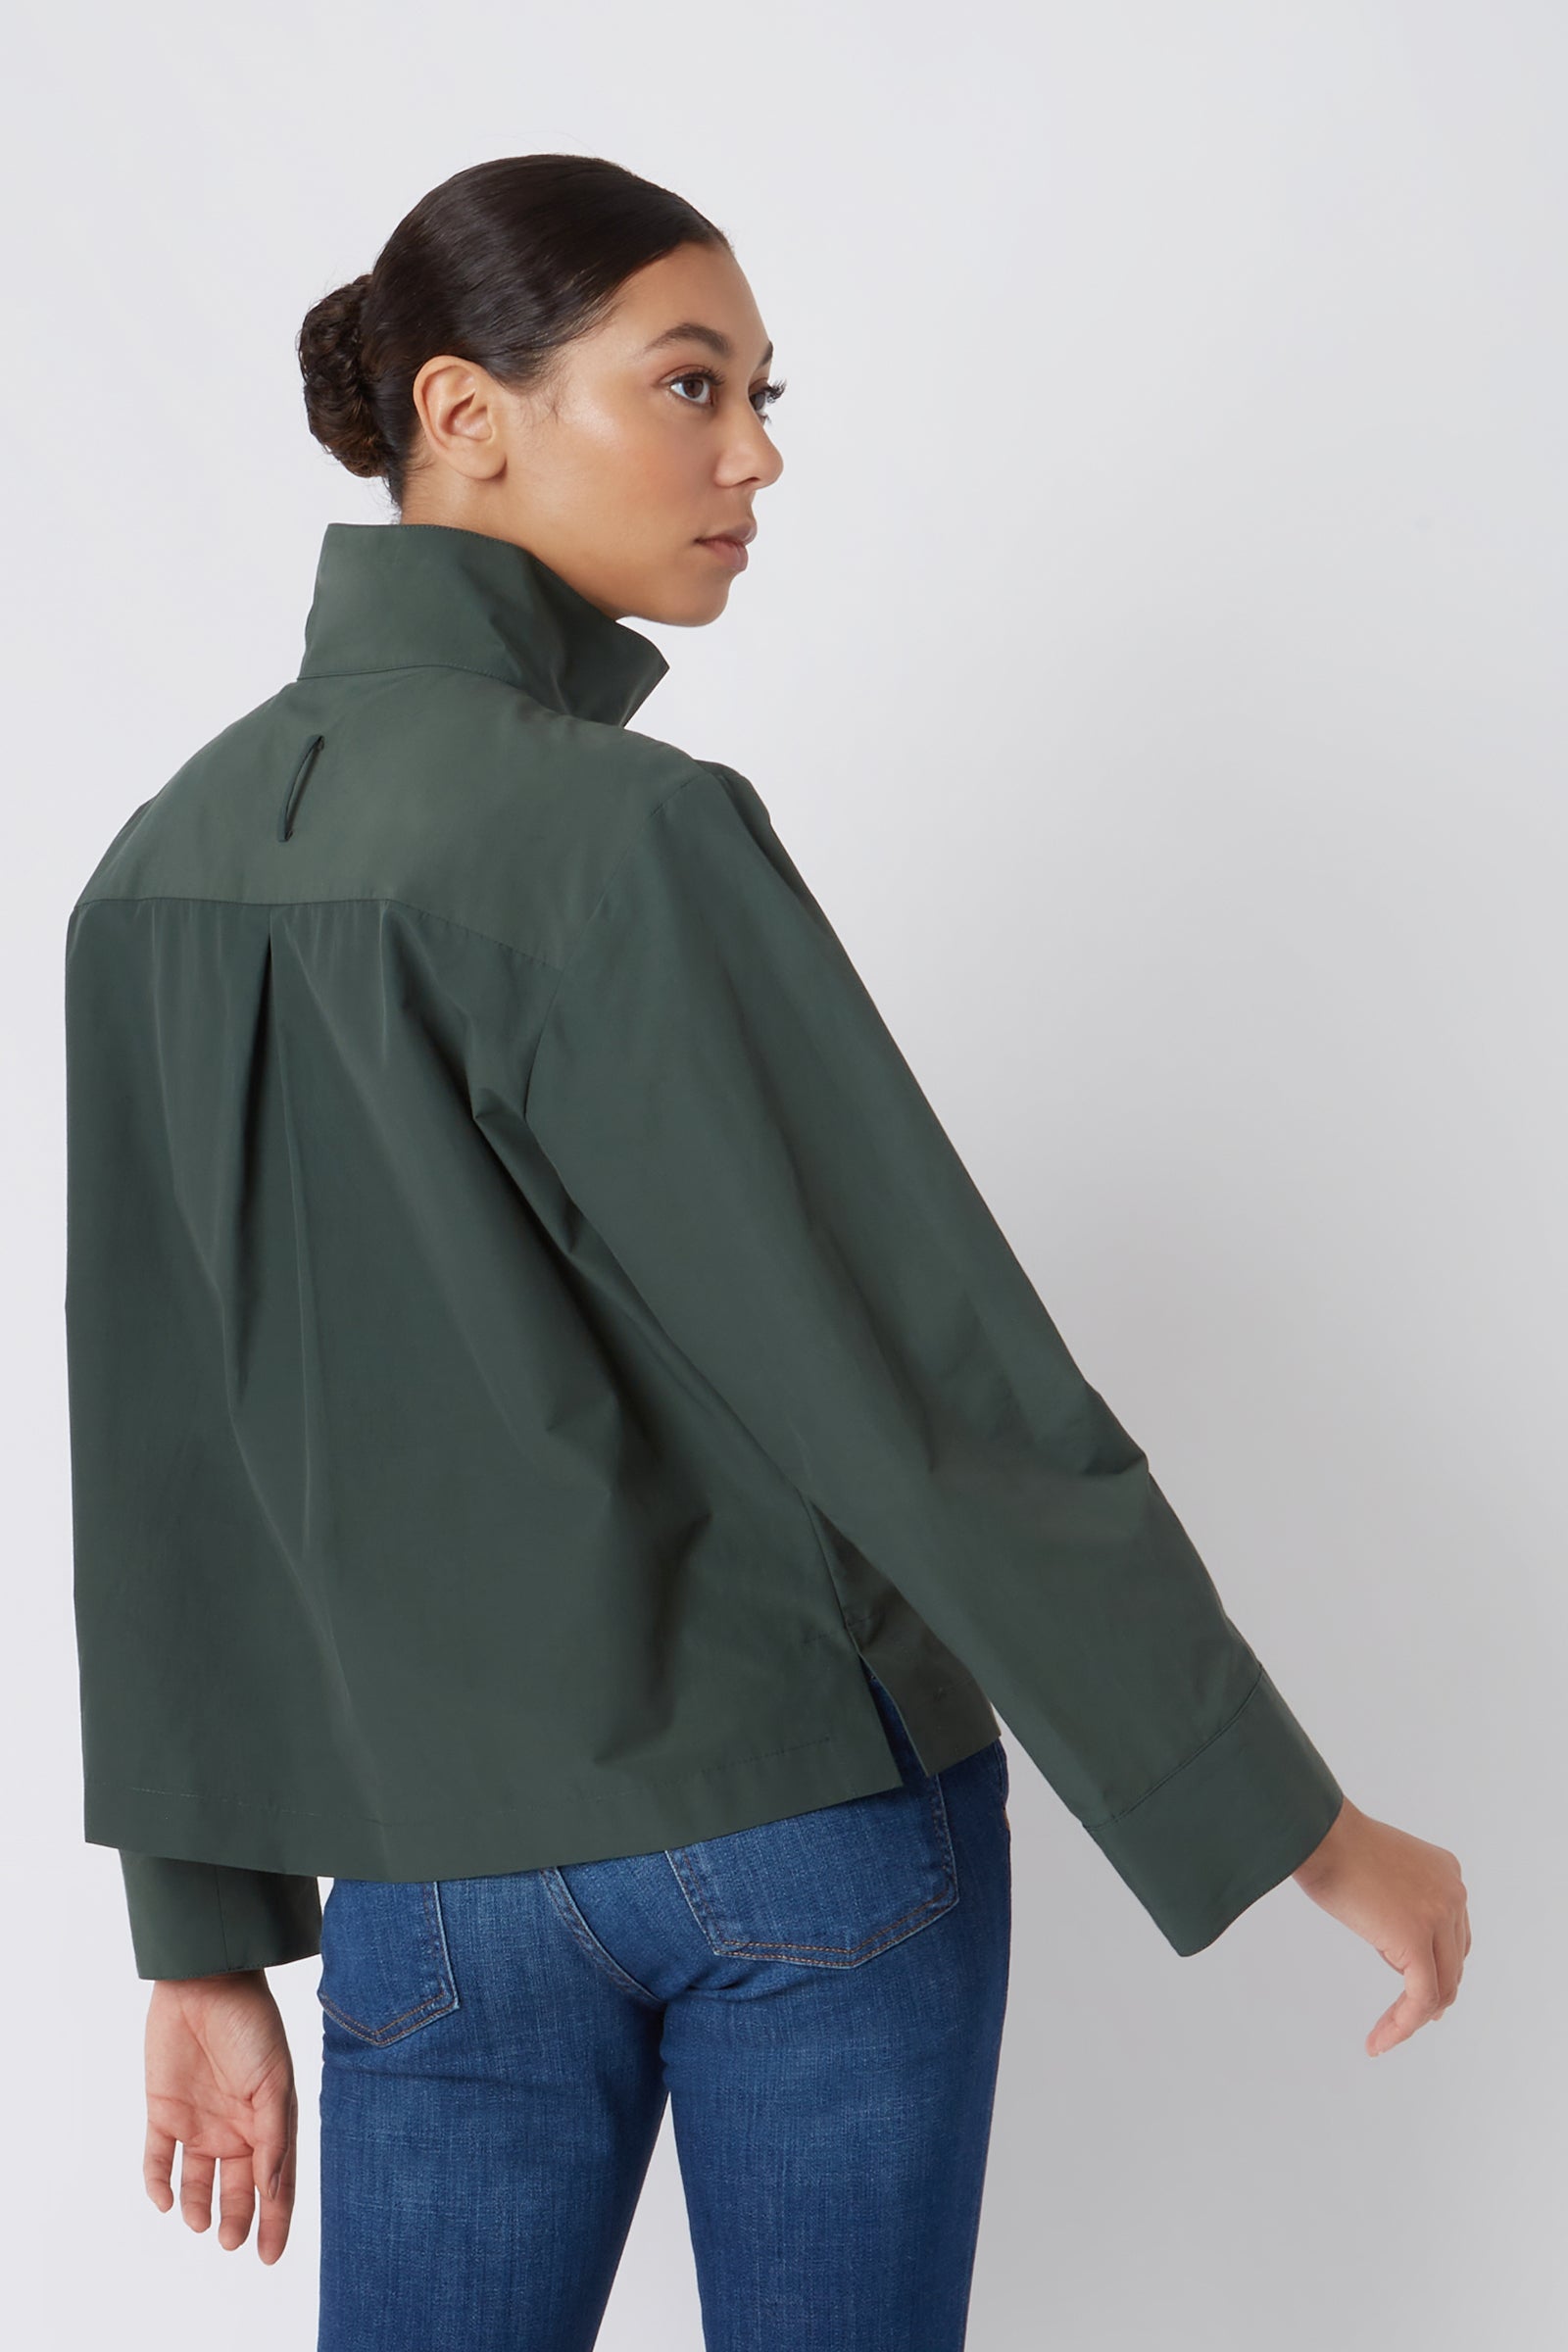 Kal Rieman Peggy Collared Shirt in Loden Broadcloth on Model Main Cropped Front View